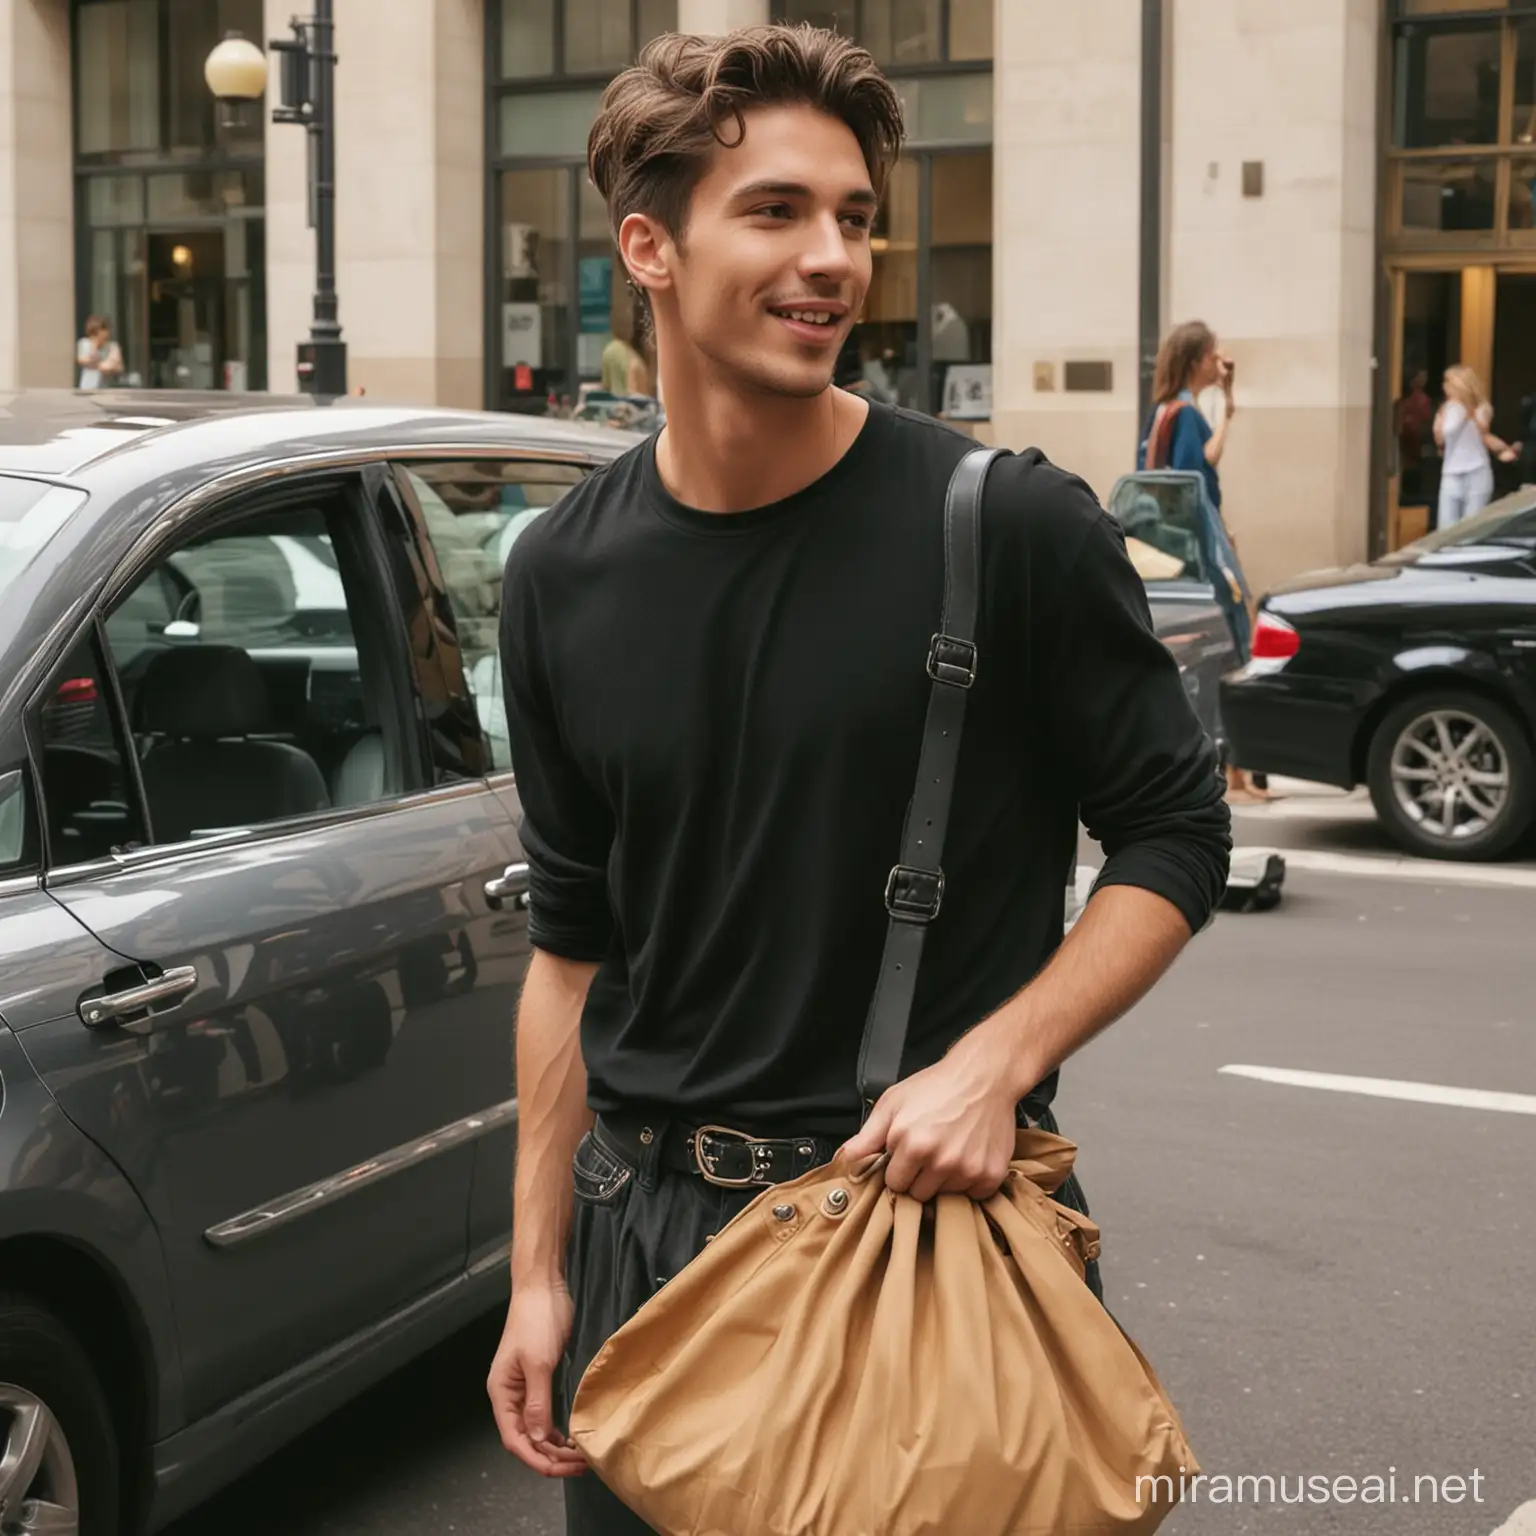 A young attractive male singer getting out of his car. He is wearing oversized pants. he has paparazzis around him, he is holding a bag.